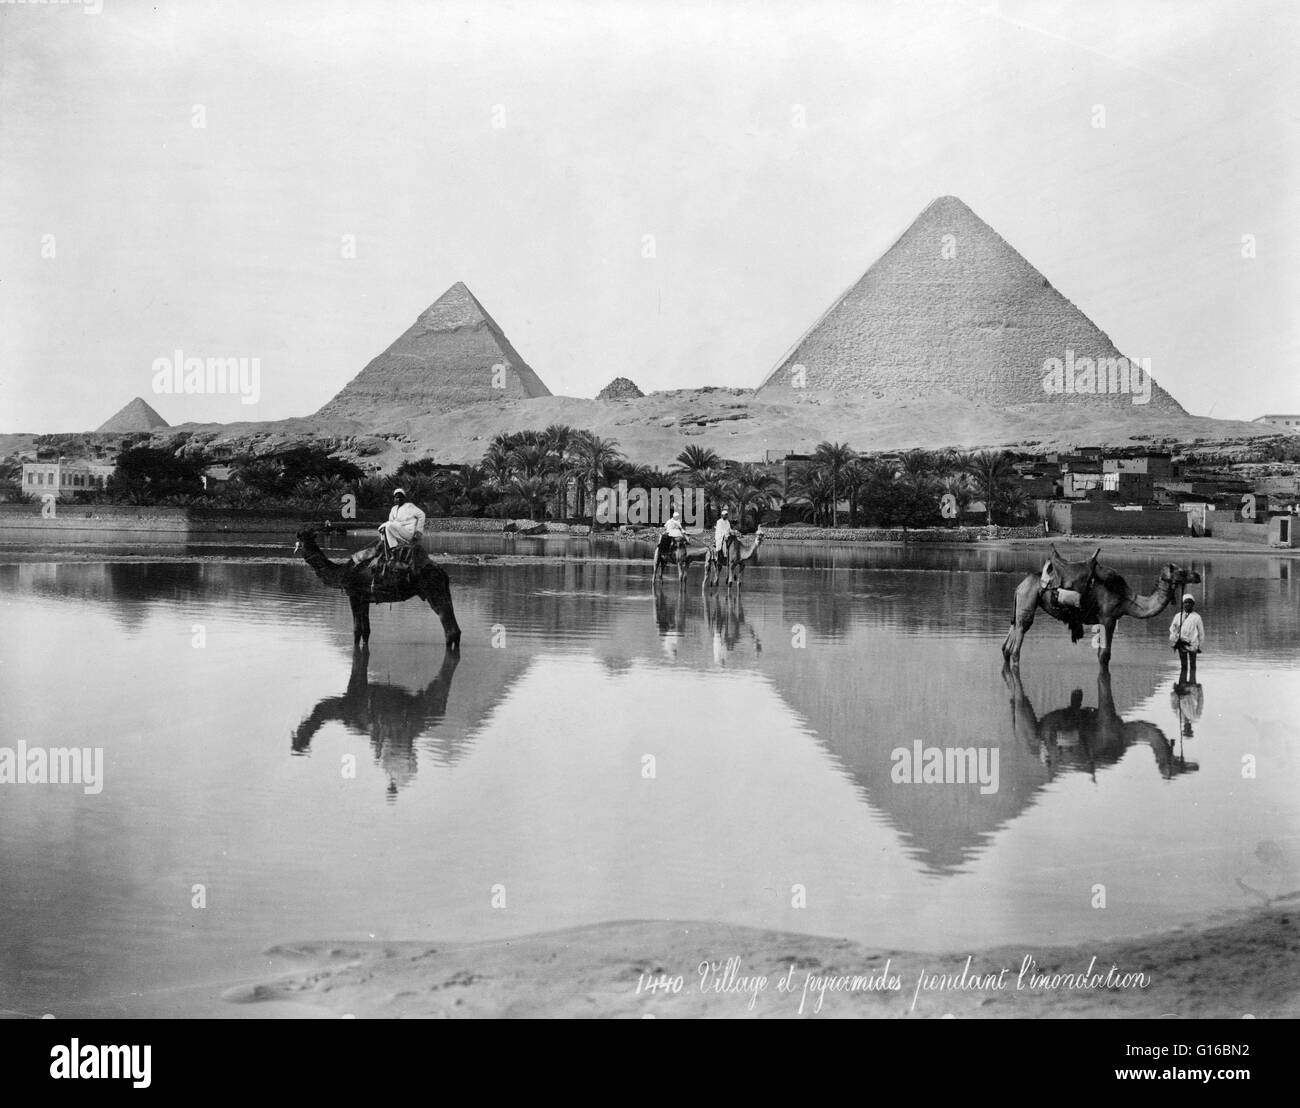 Entitled: 'Village and pyramids during the flood-time, circa 189?'. shows men on camels and one man standing next to a camel in shallow flood water, with pyramids in the background. The Giza Necropolis (pyramids of Giza) is an archeological site on the Gi Stock Photo